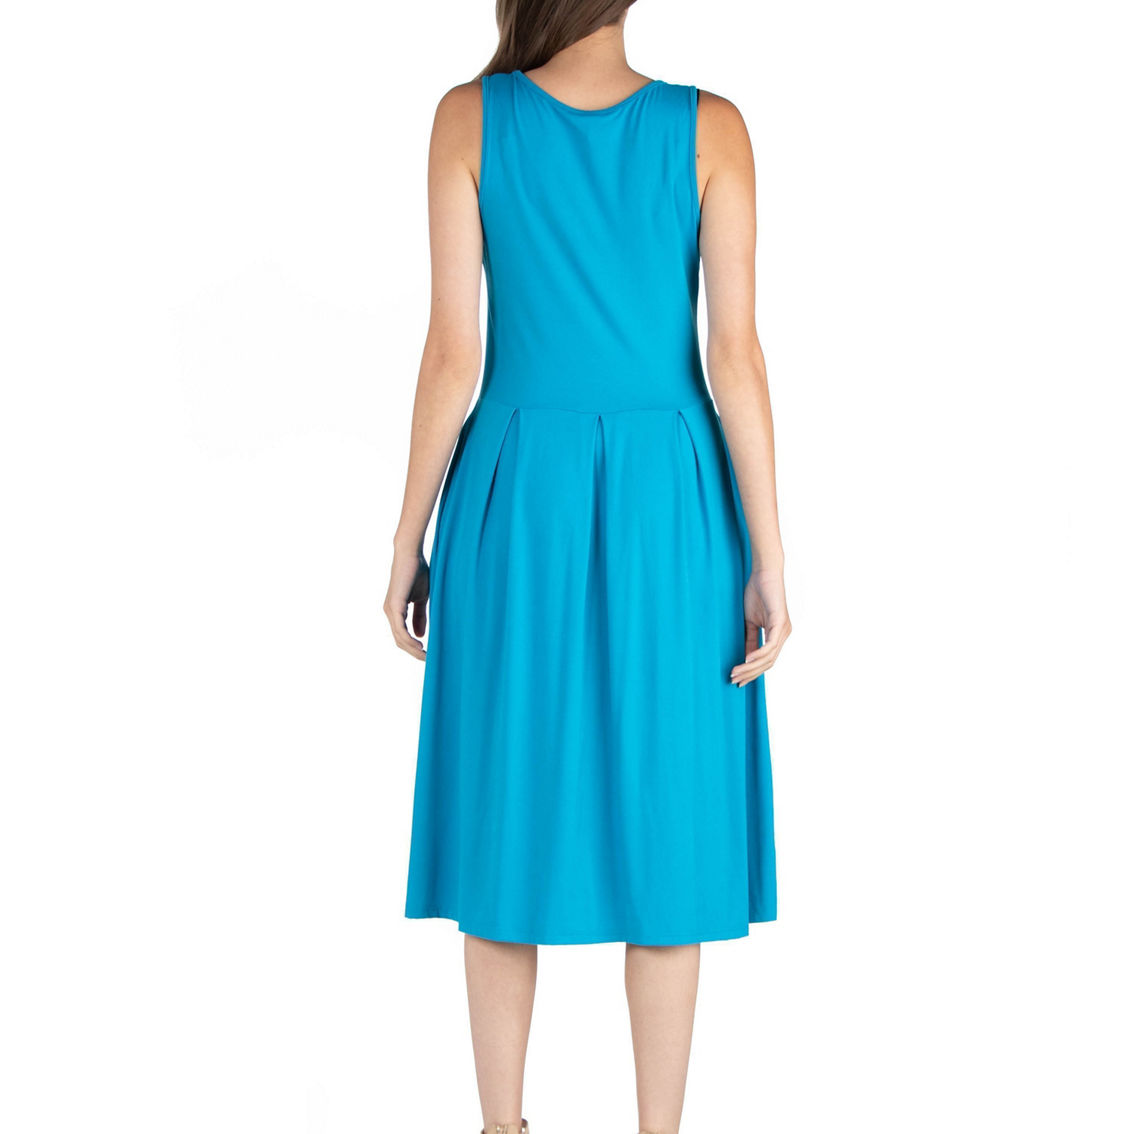 24seven Comfort Apparel Fit and Flare Midi Sleeveless Dress with Pocket Detail - Image 3 of 4